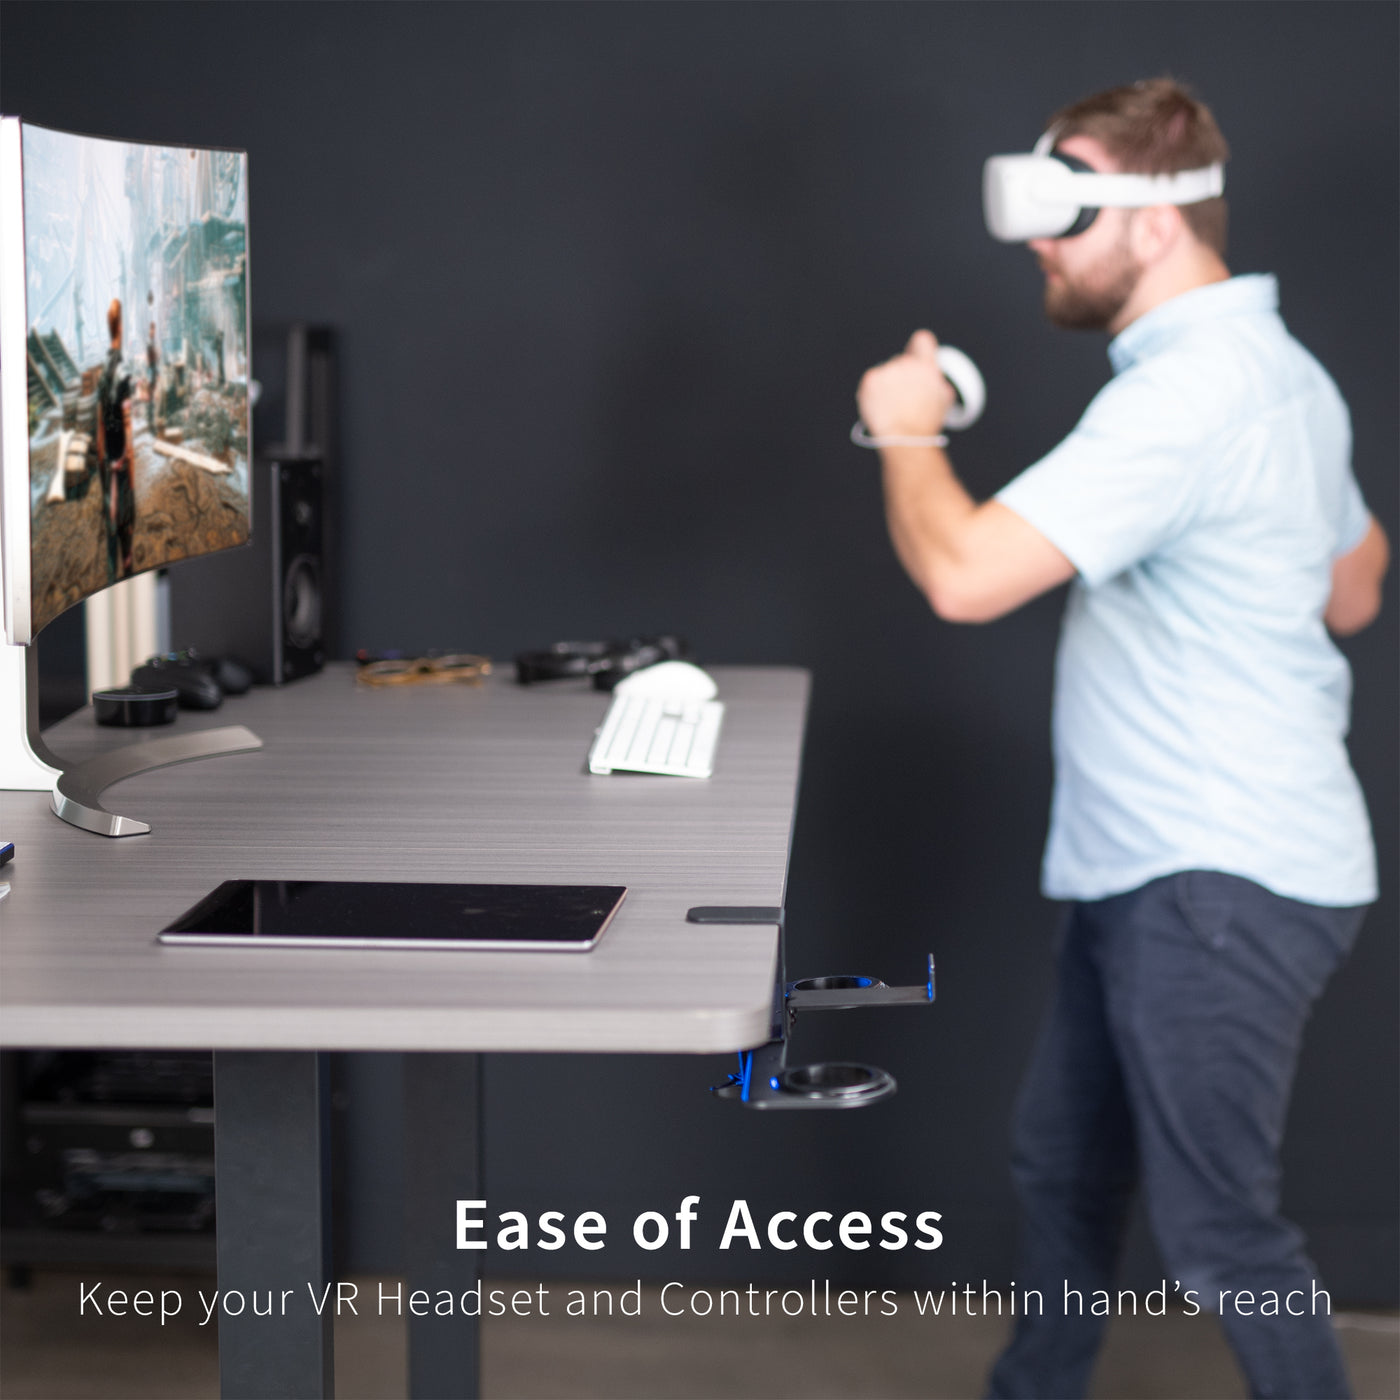 Clamp-on VR headset stand that mounts to desk for storage and convenient access.